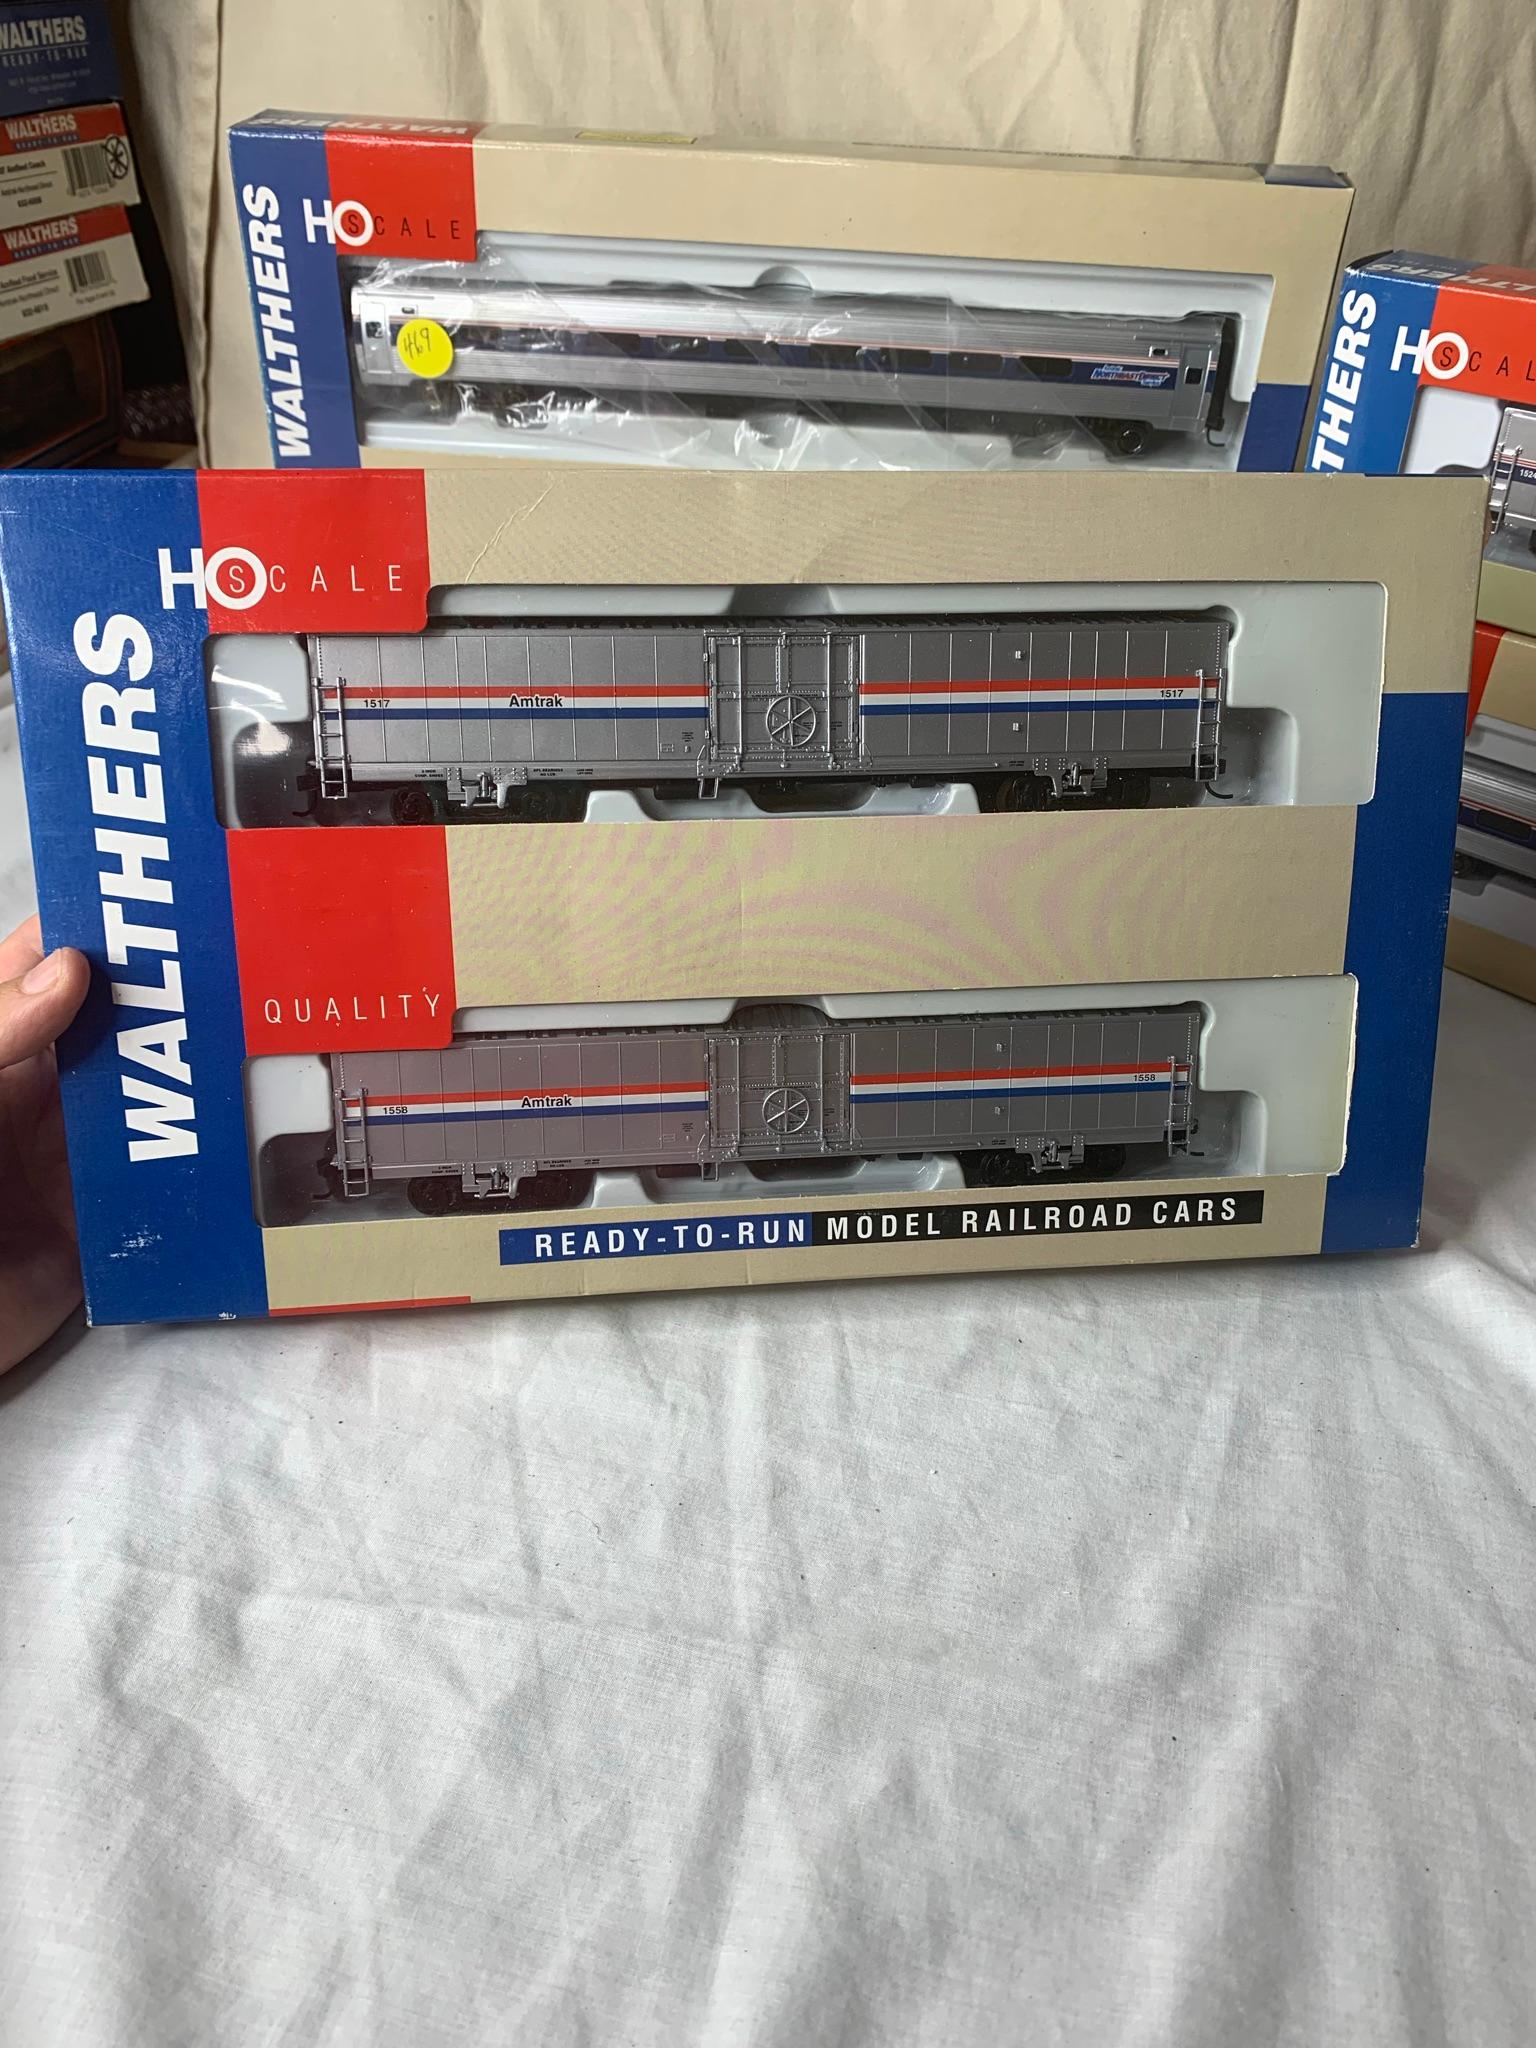 5 Packages of Walthers Trains